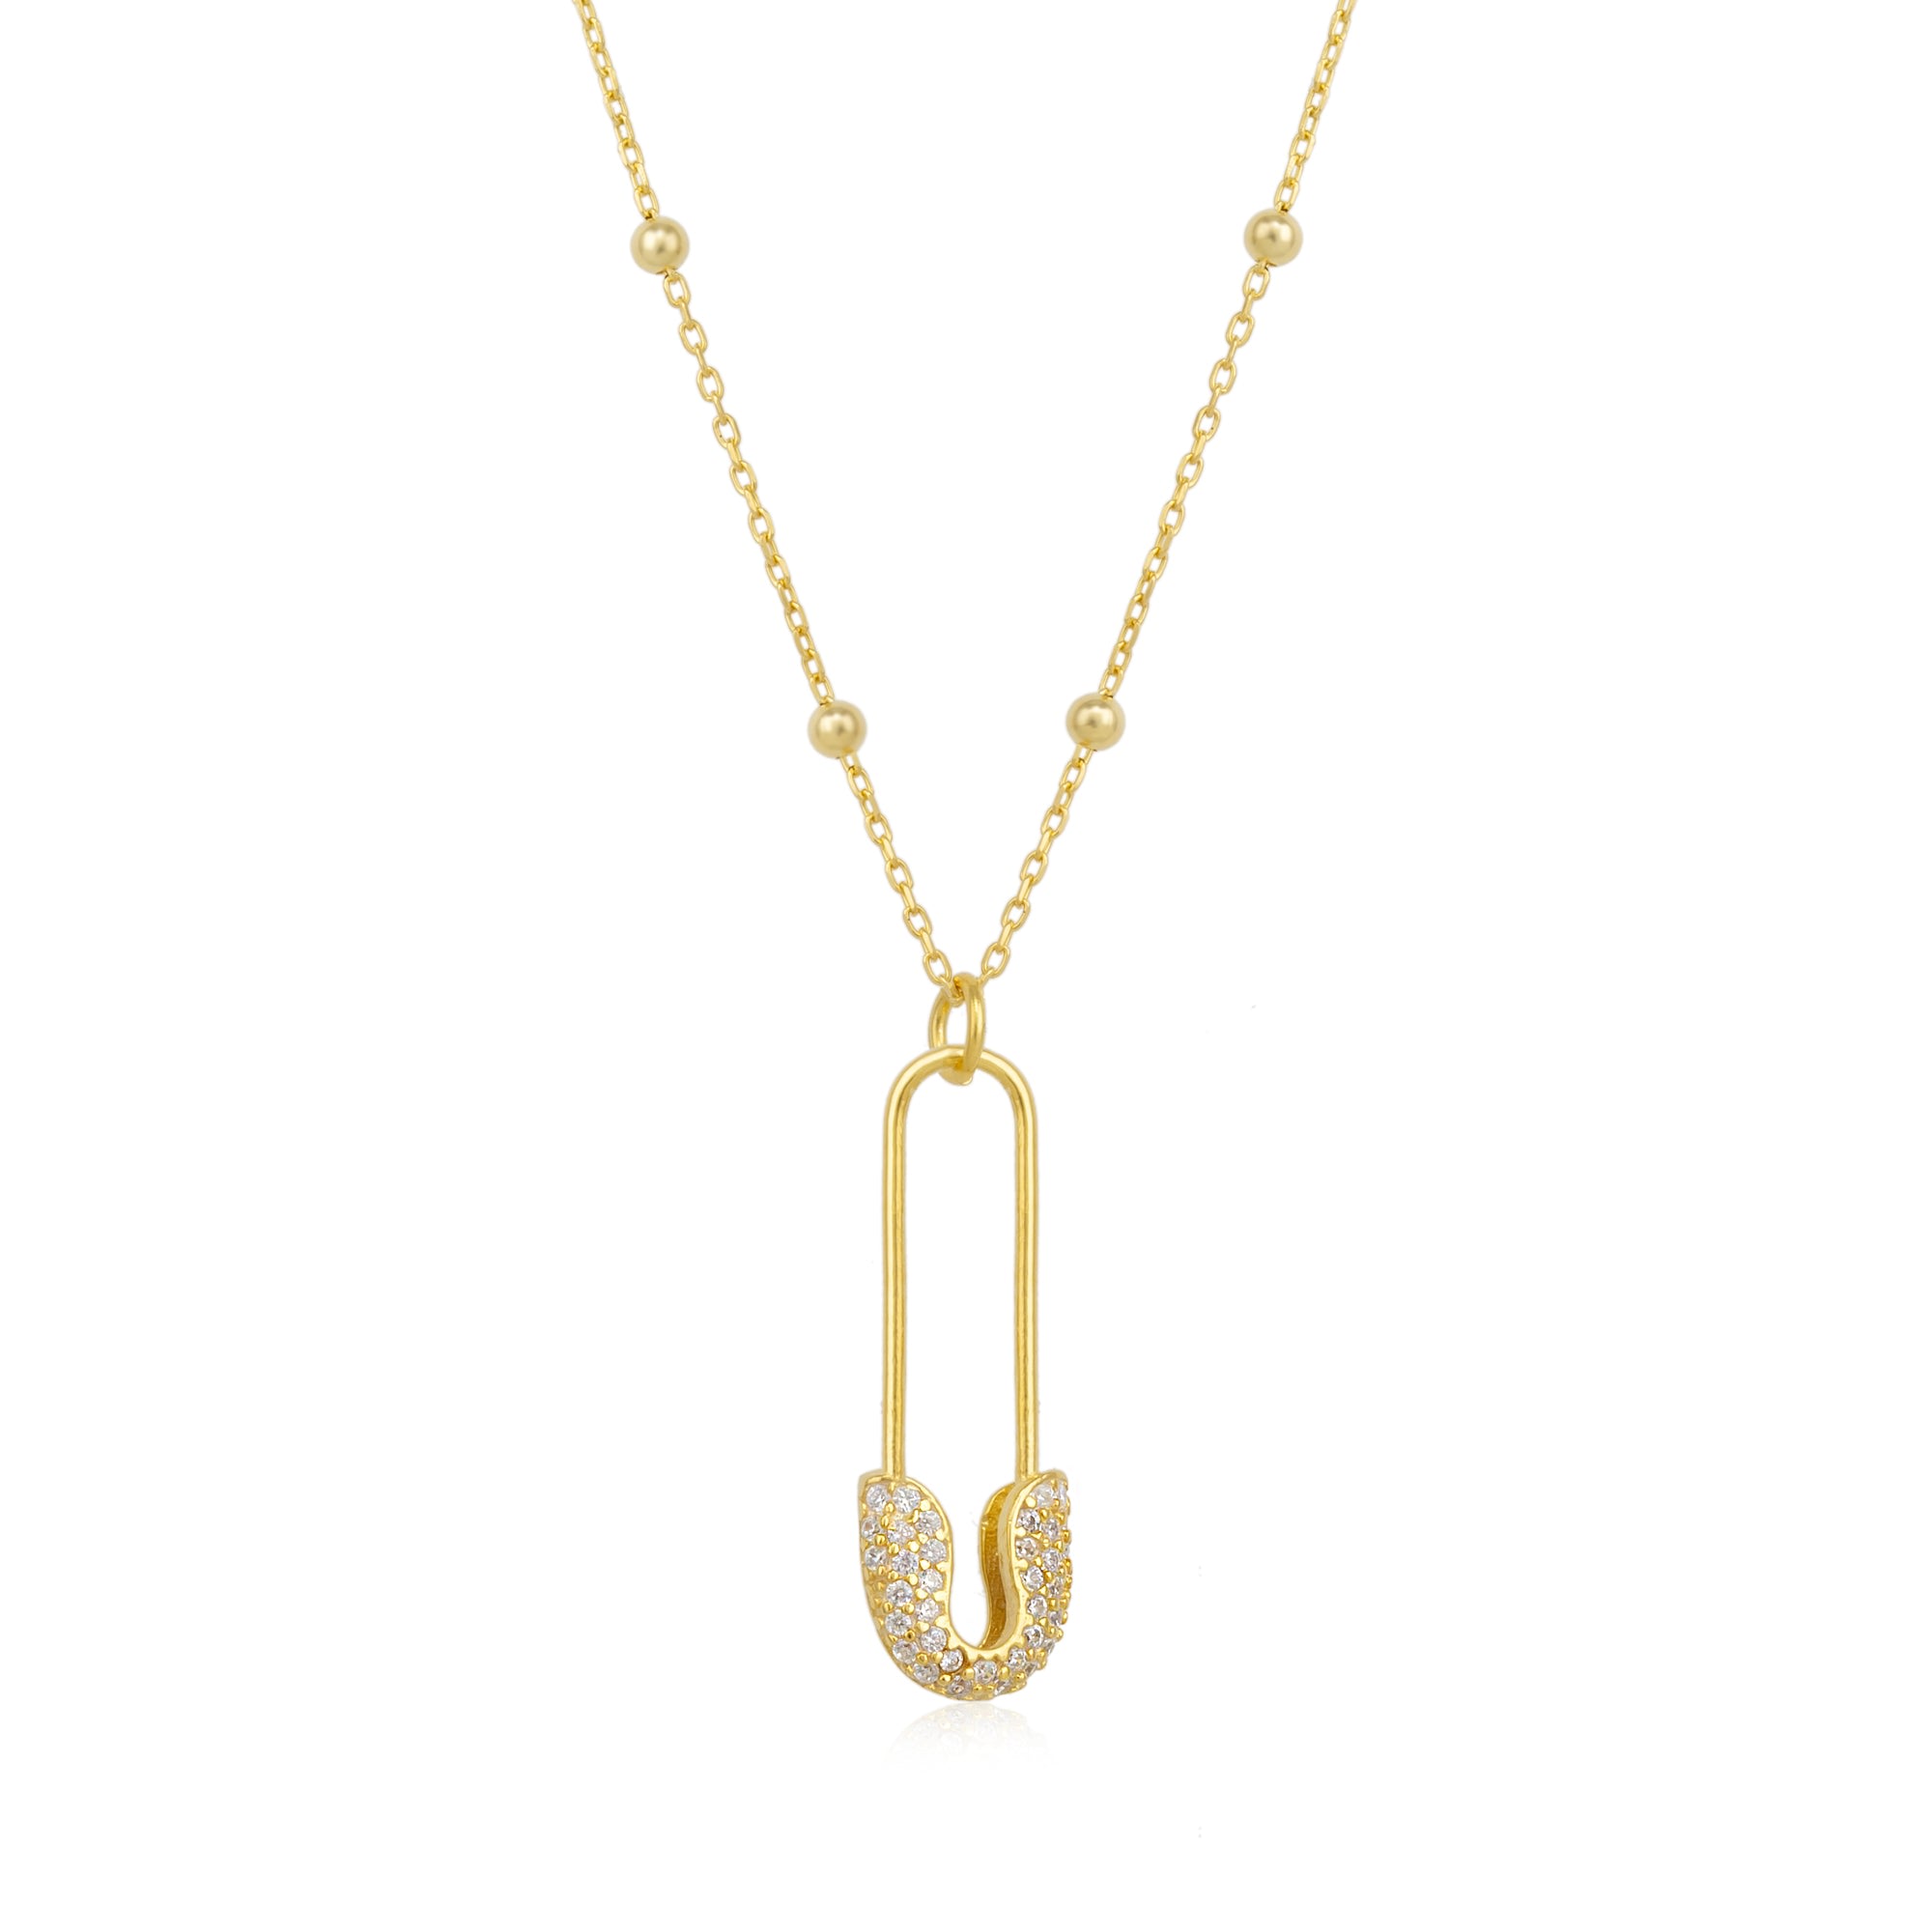 Women’s Pave Safety Pin Necklace Jewelled With Beaded Chain In Sterling Silver - Gold Spero London